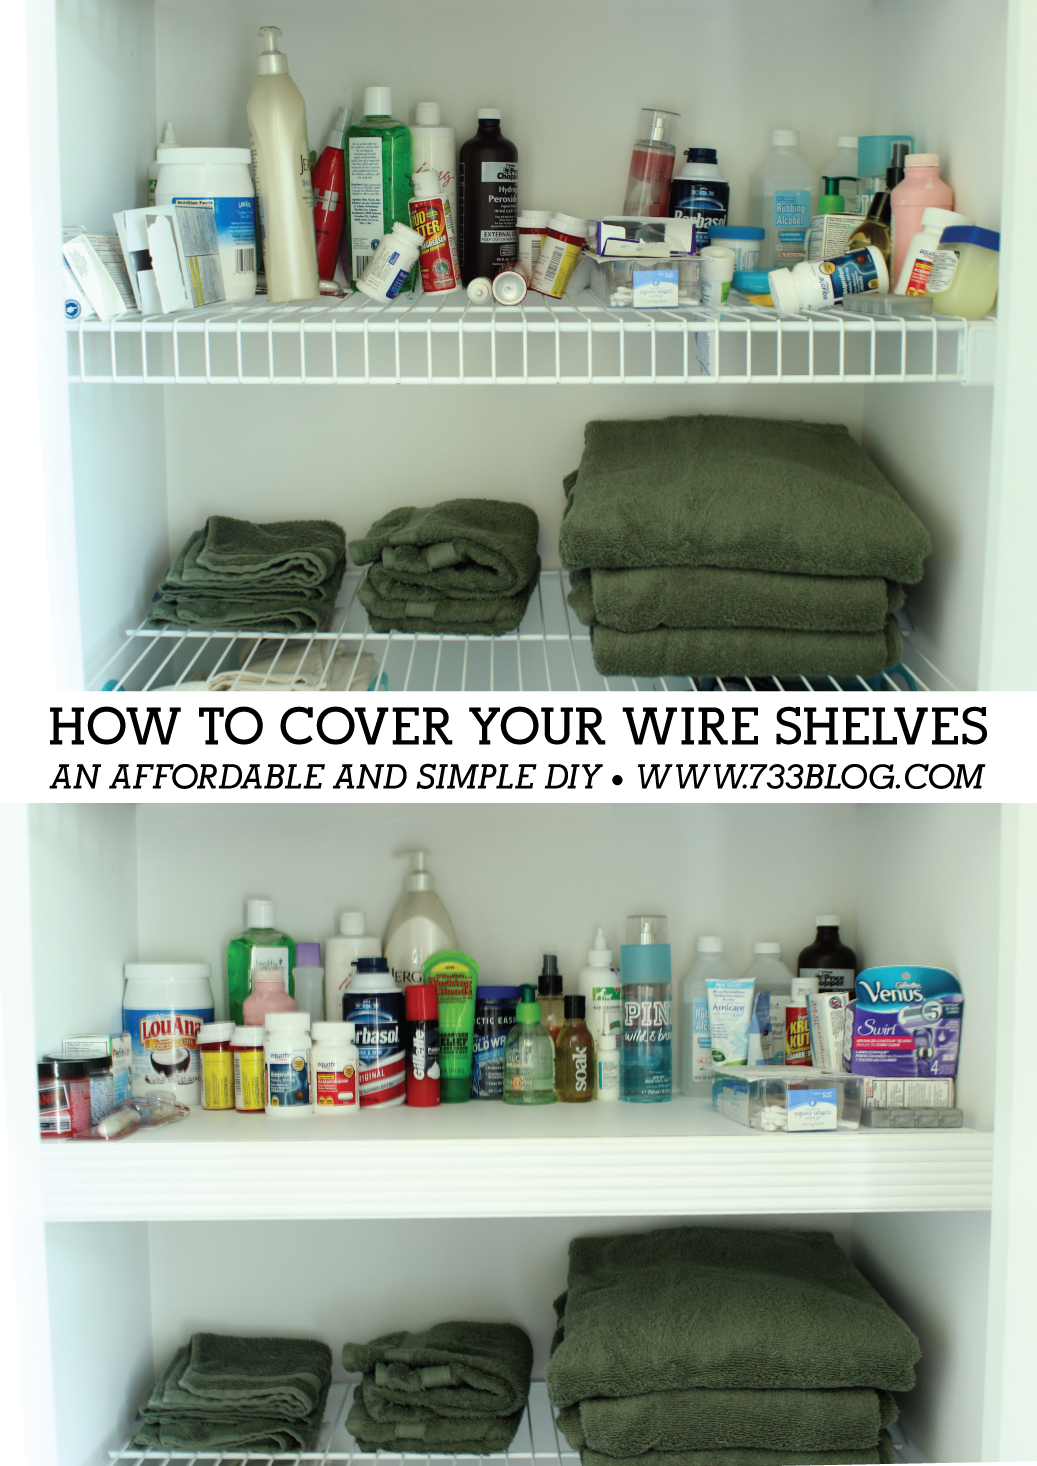 How to cover your wire shelves - an affordable and simple DIY